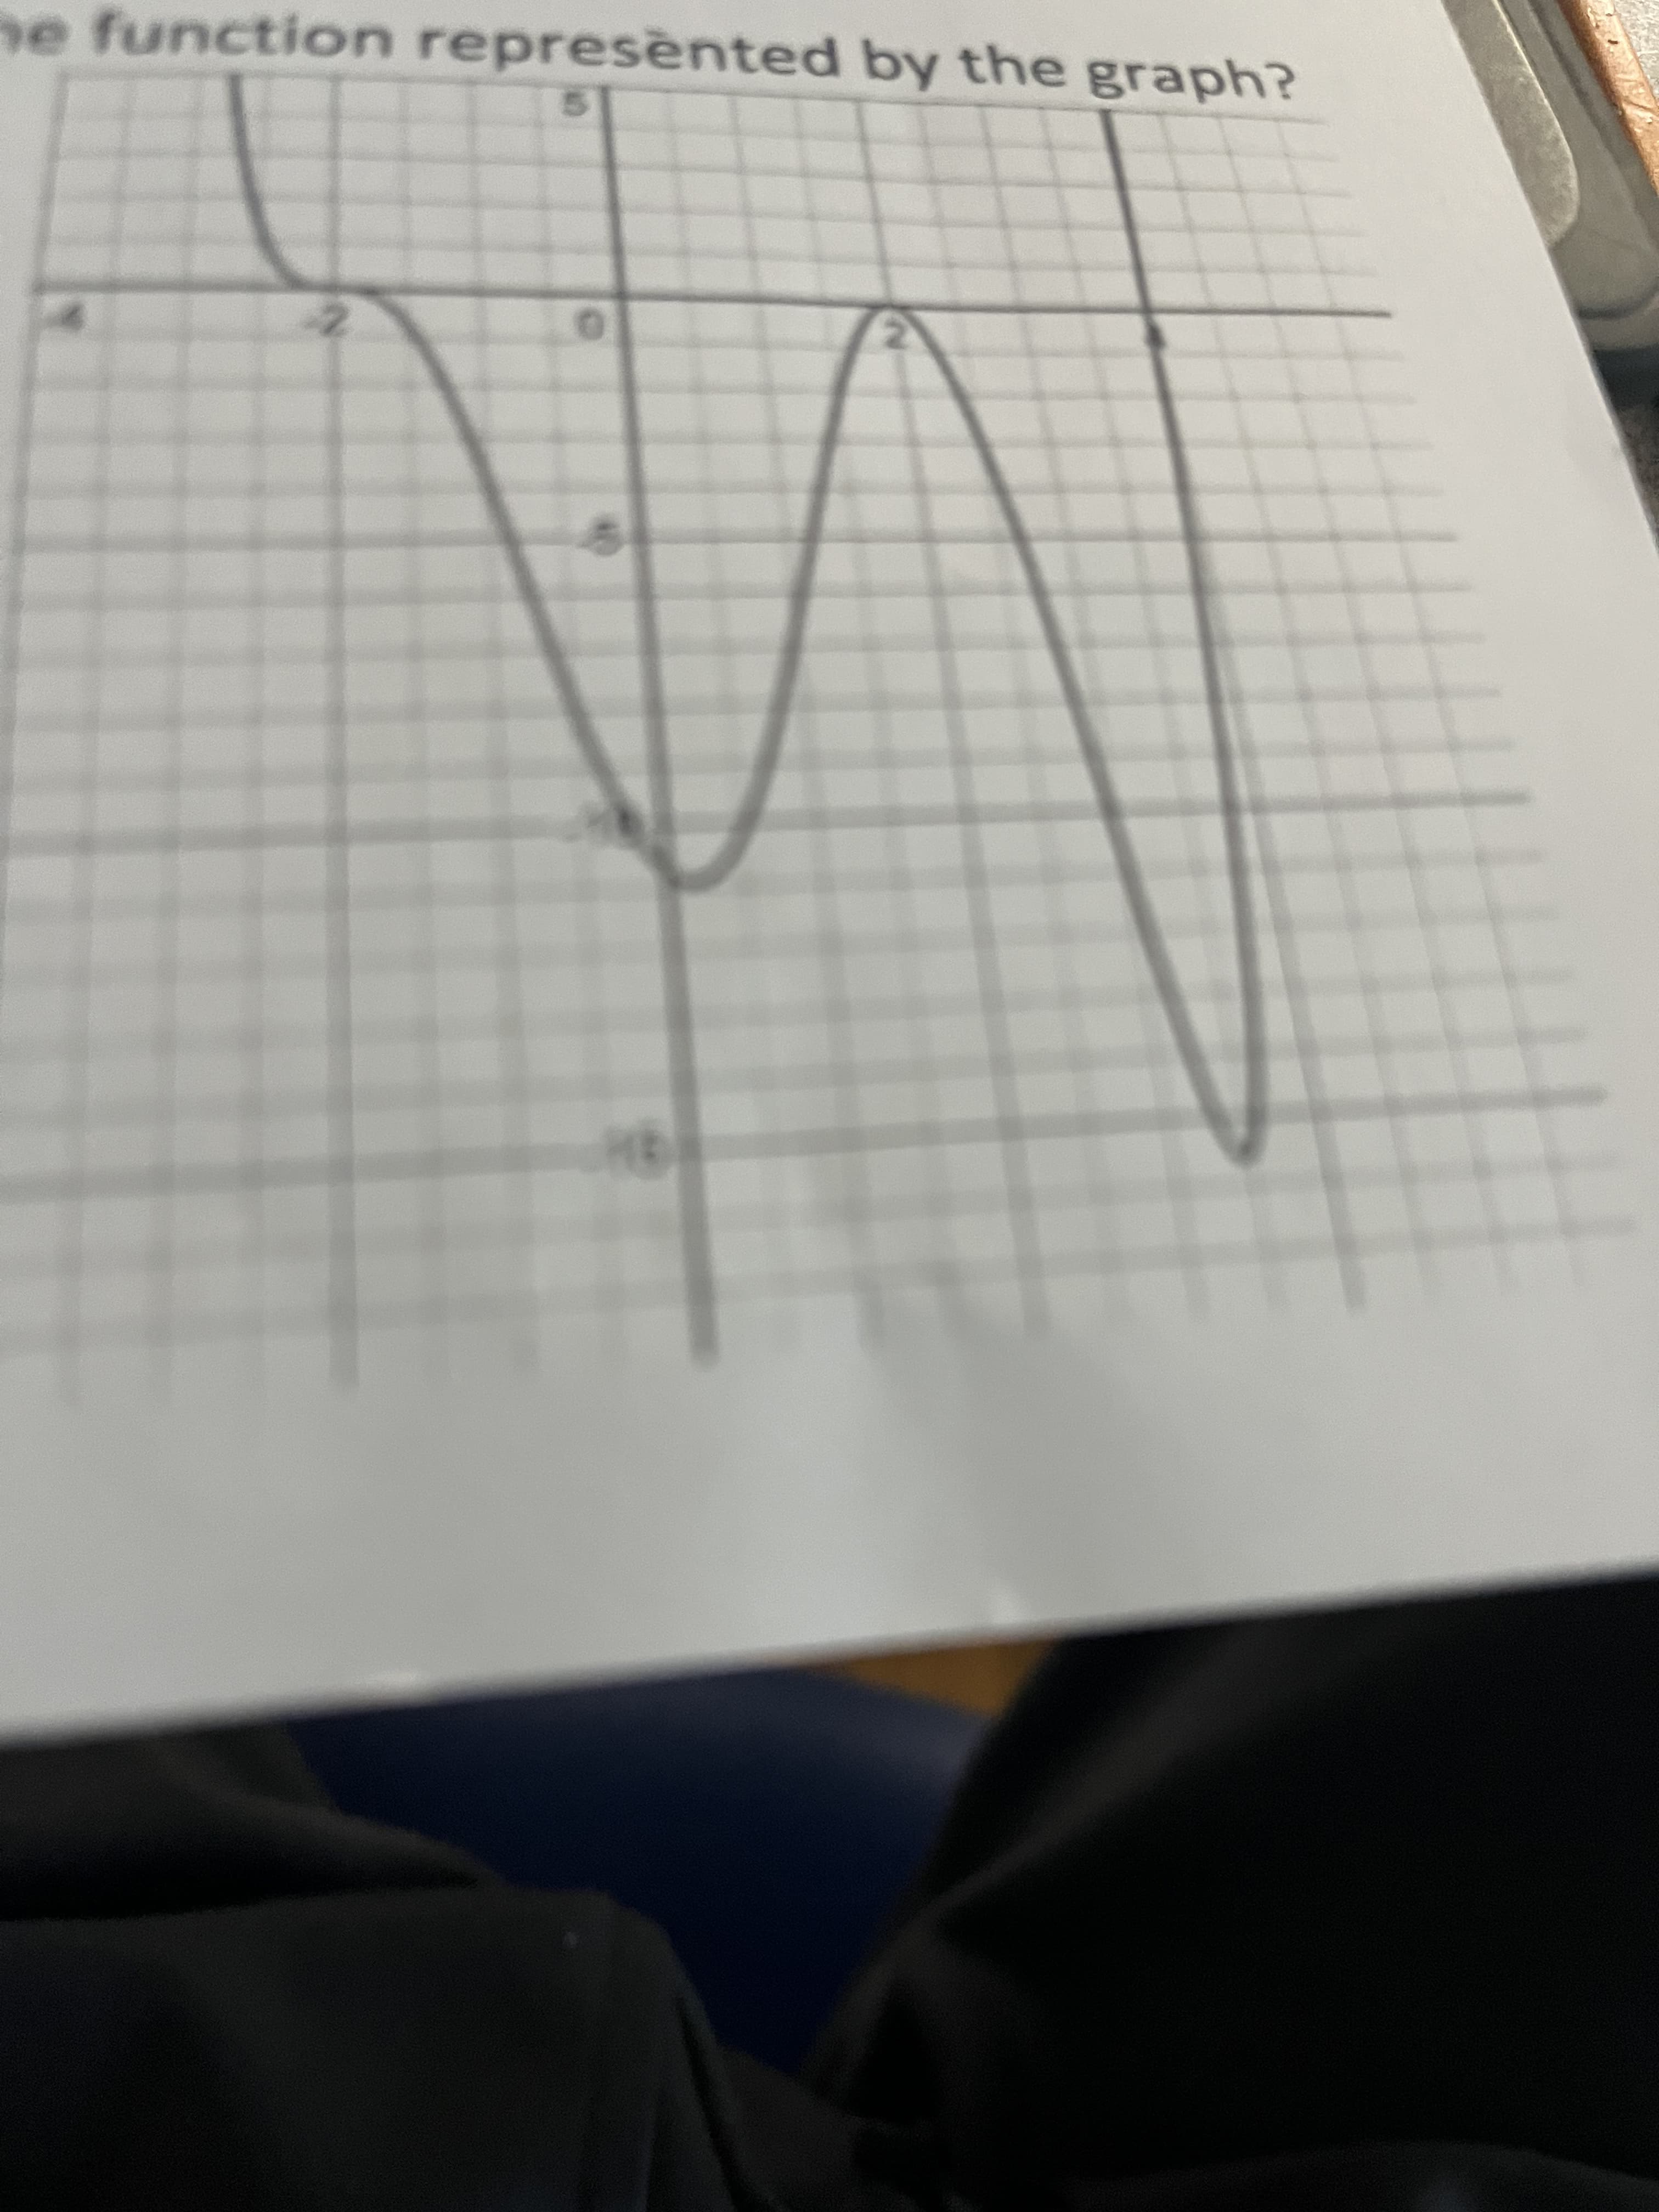 he function represènted by the graph?
